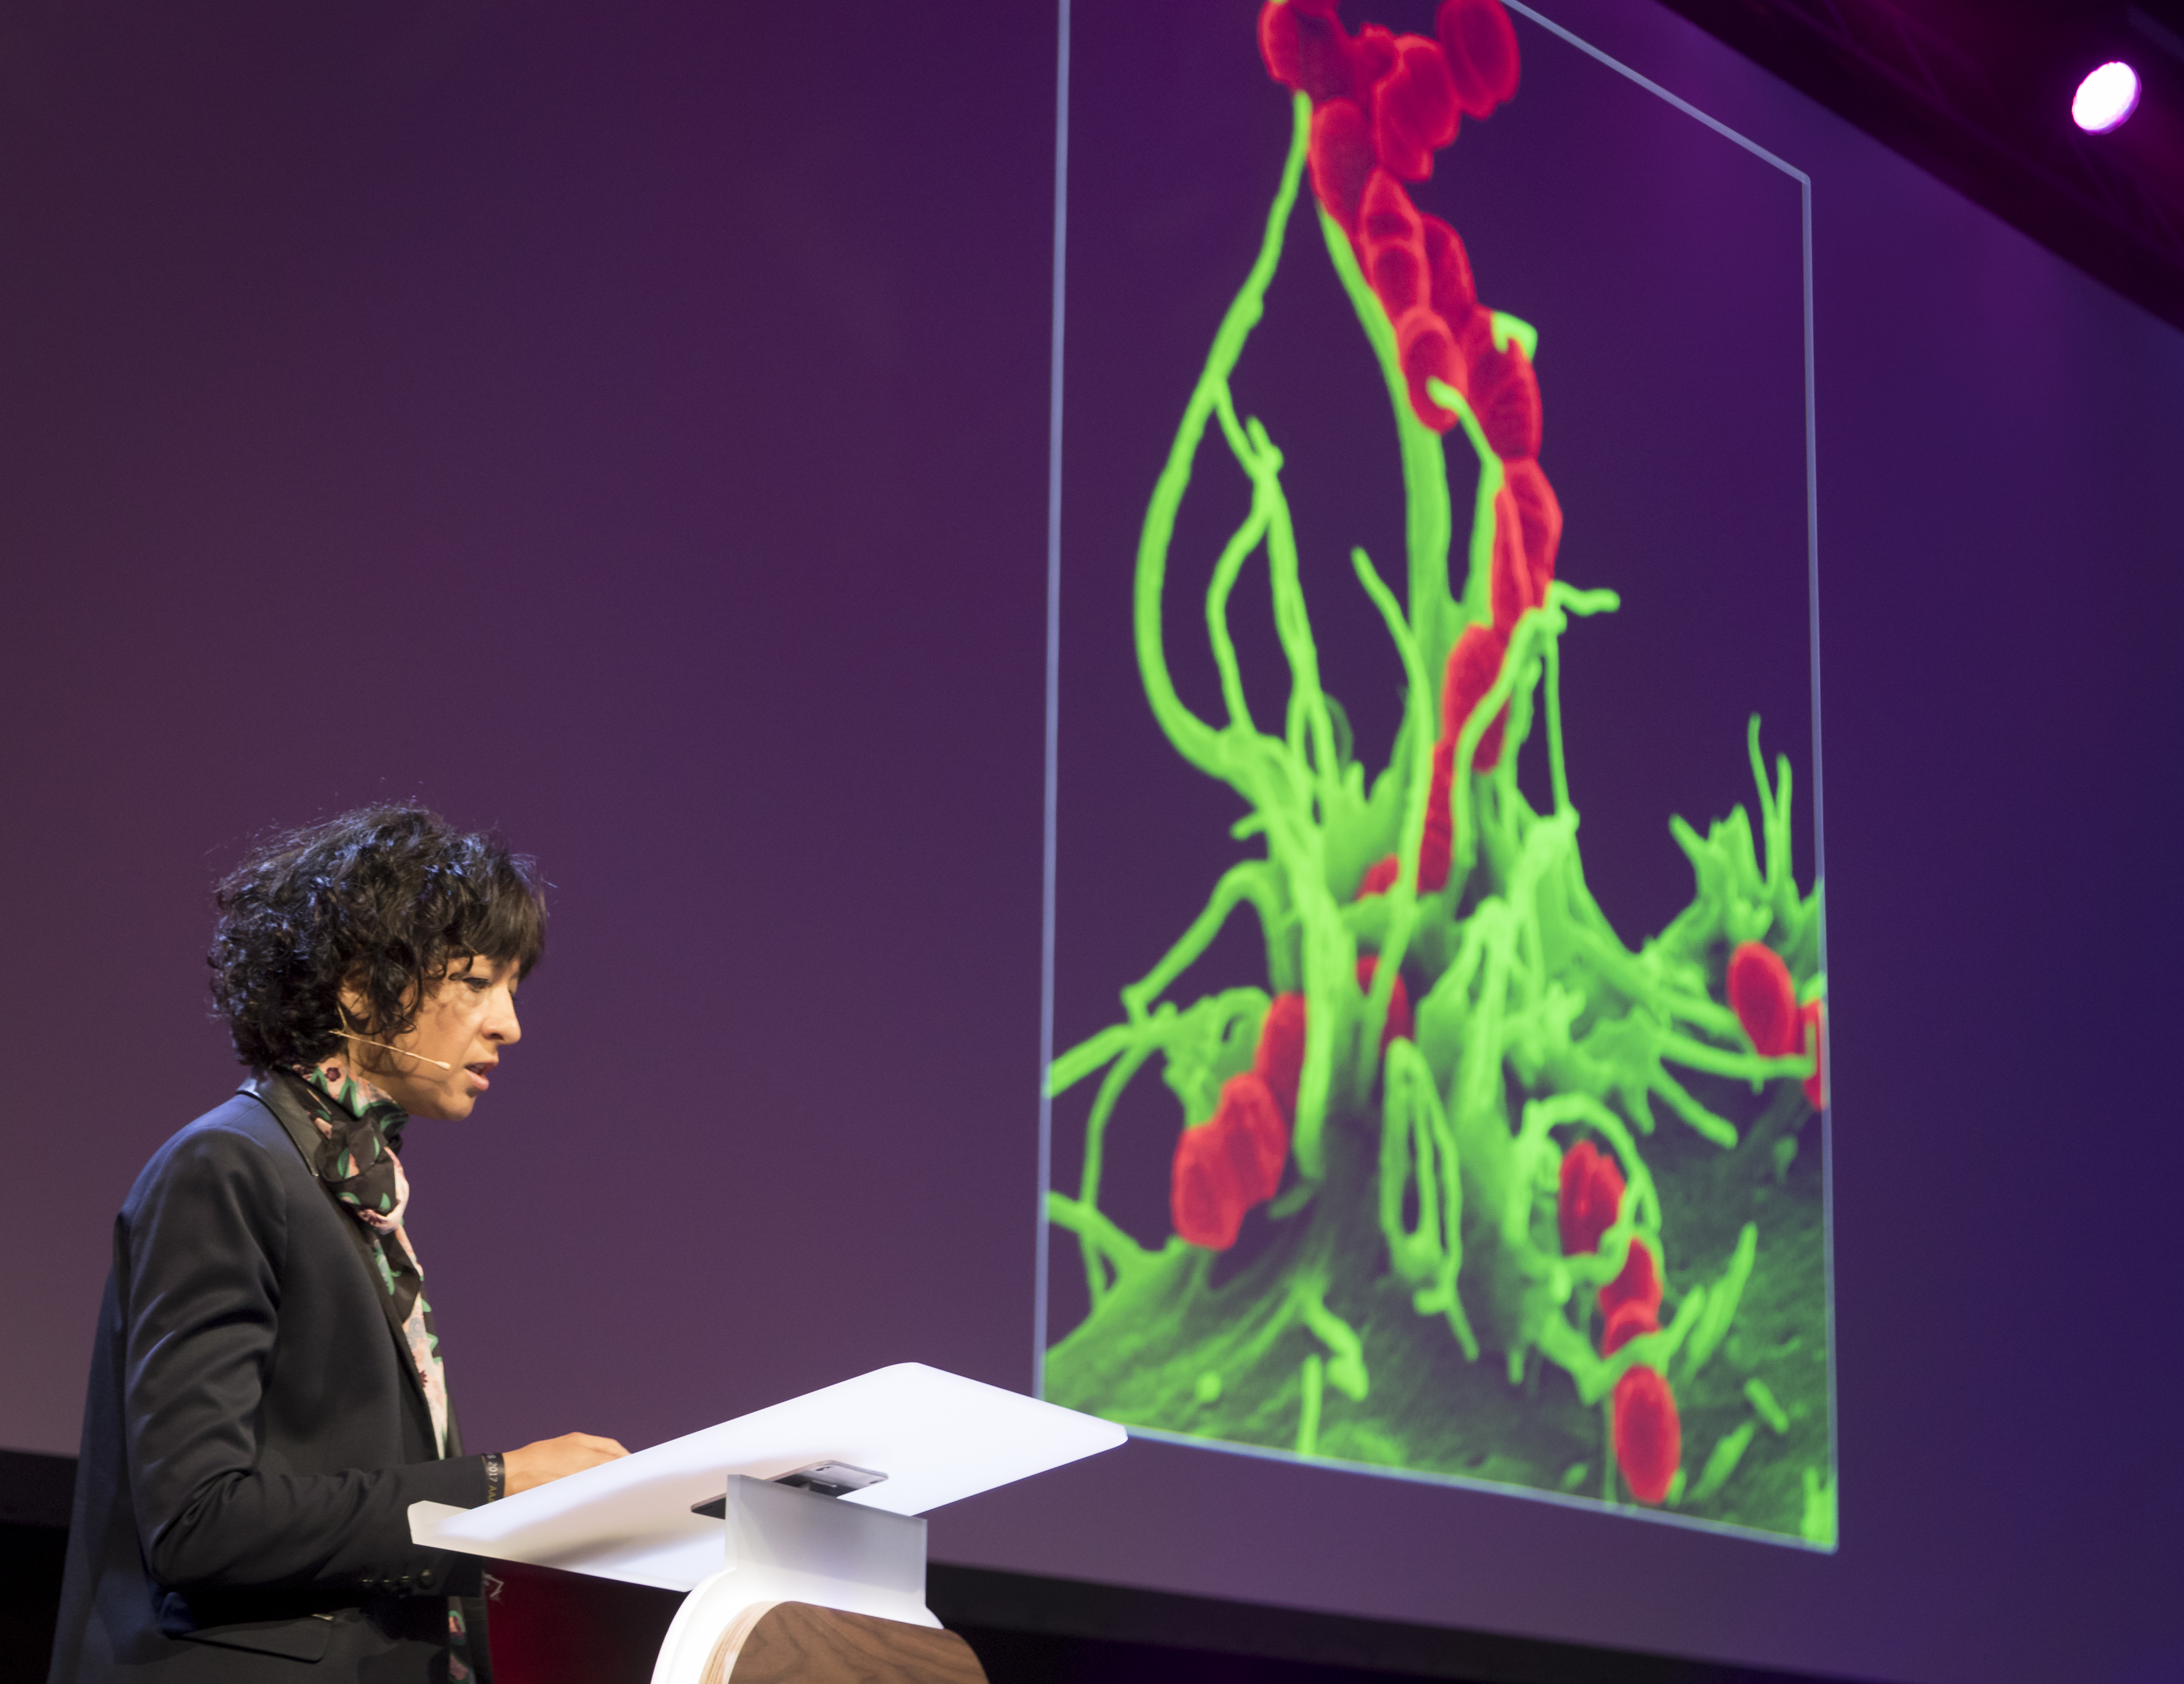 Photo of Charpentier presenting, with a picture of microscopic cells in the background.